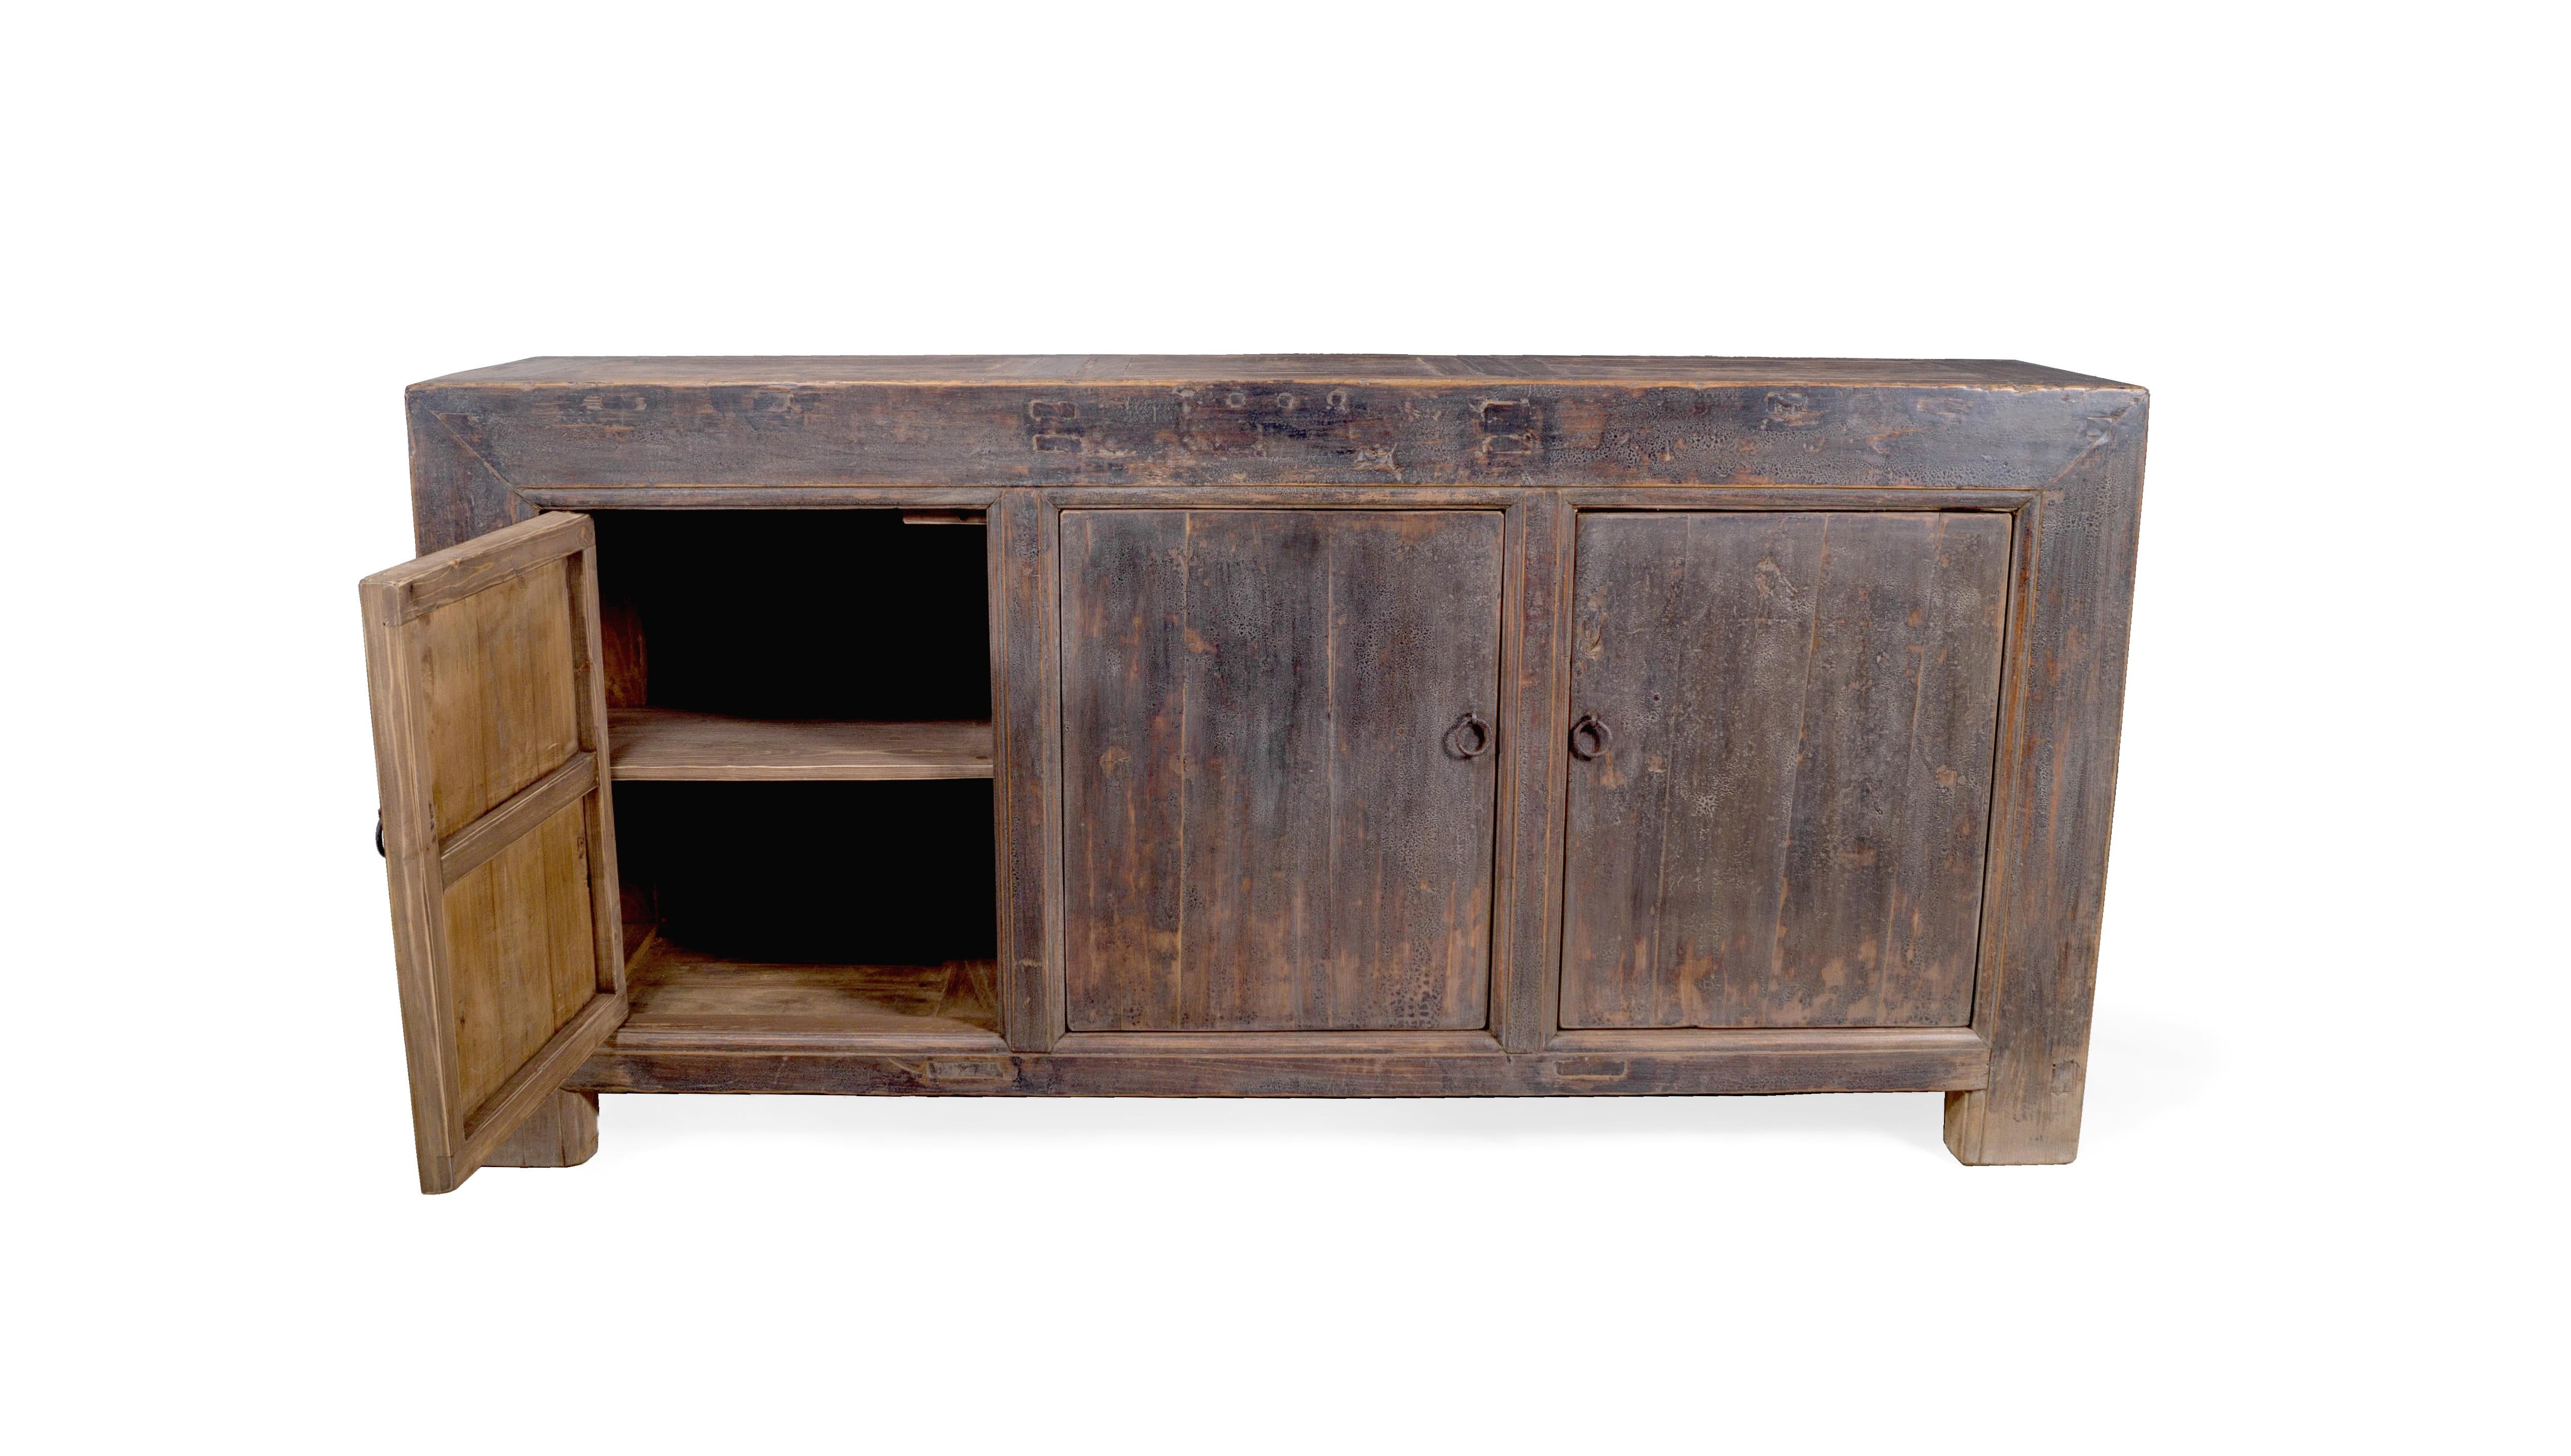 This three door server features a one of a kind warm gray tones paint patina. This piece can truly fit any interior design style from transitional to modern organic, industrial, or traditional. 

This piece is a part of Brendan Bass’s